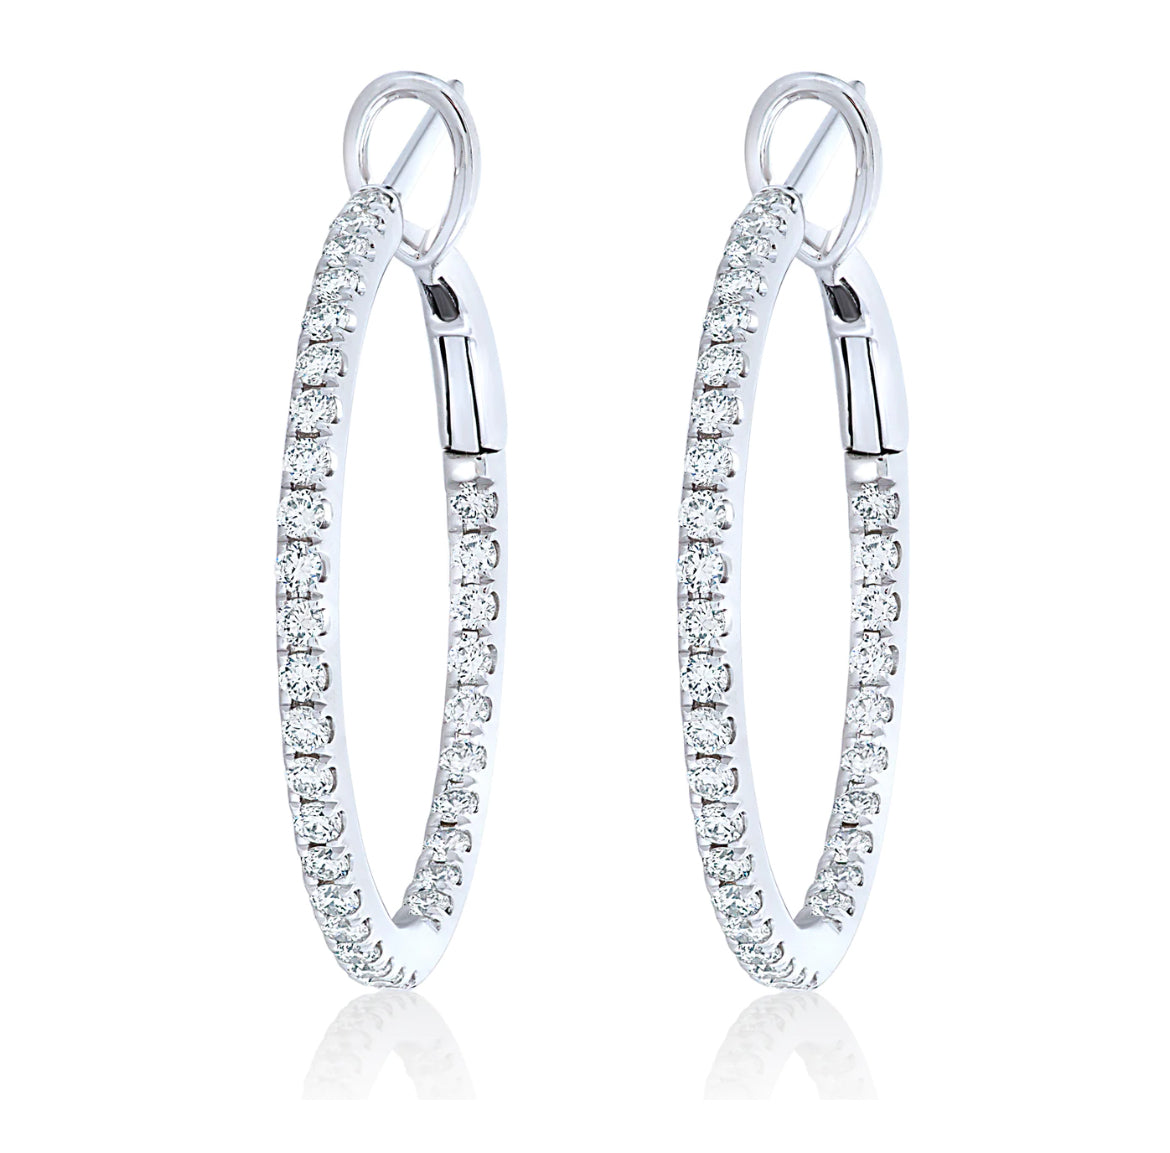 These Large Hoop Earrings feature 4.40 ct Round diamonds of F/G color and VS1 clarity. The hoops are 2.70 mm thick and 1.5" size, crafted from 18k white gold with a secure lock clasp. Lever back system ensures the earrings are easy to put on and take off.